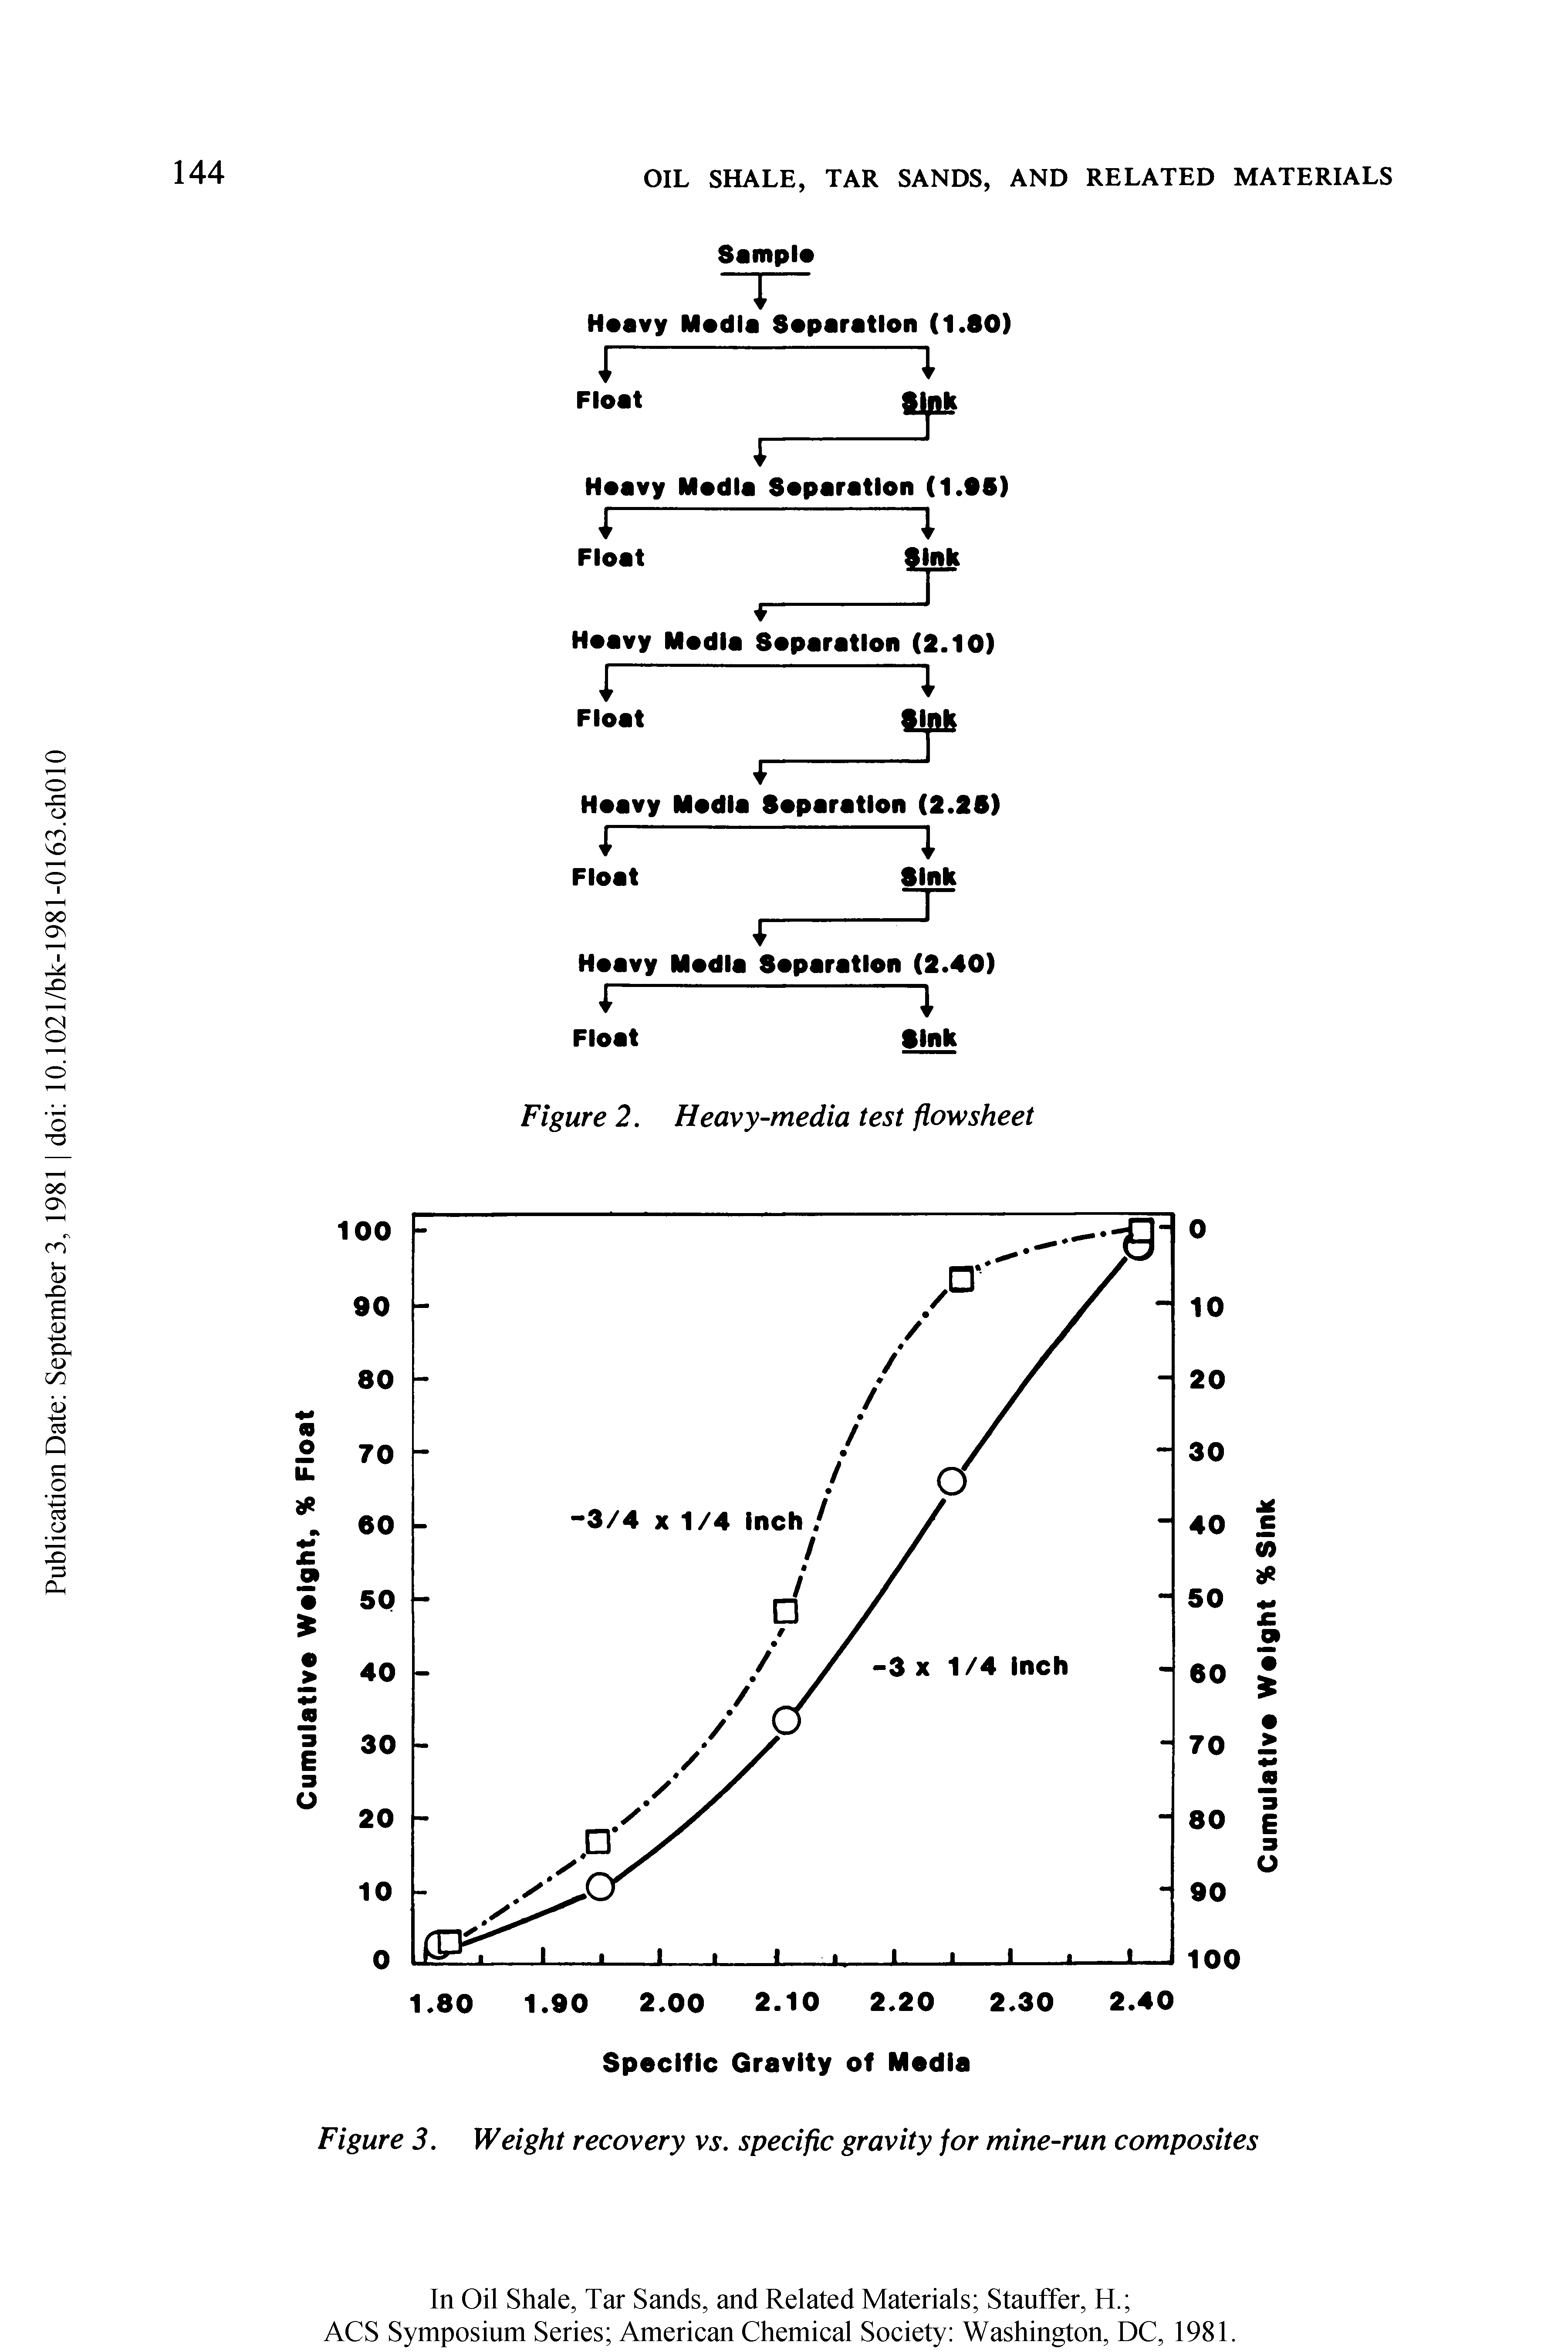 Figure 3. Weight recovery vs. specific gravity for mine-run composites...